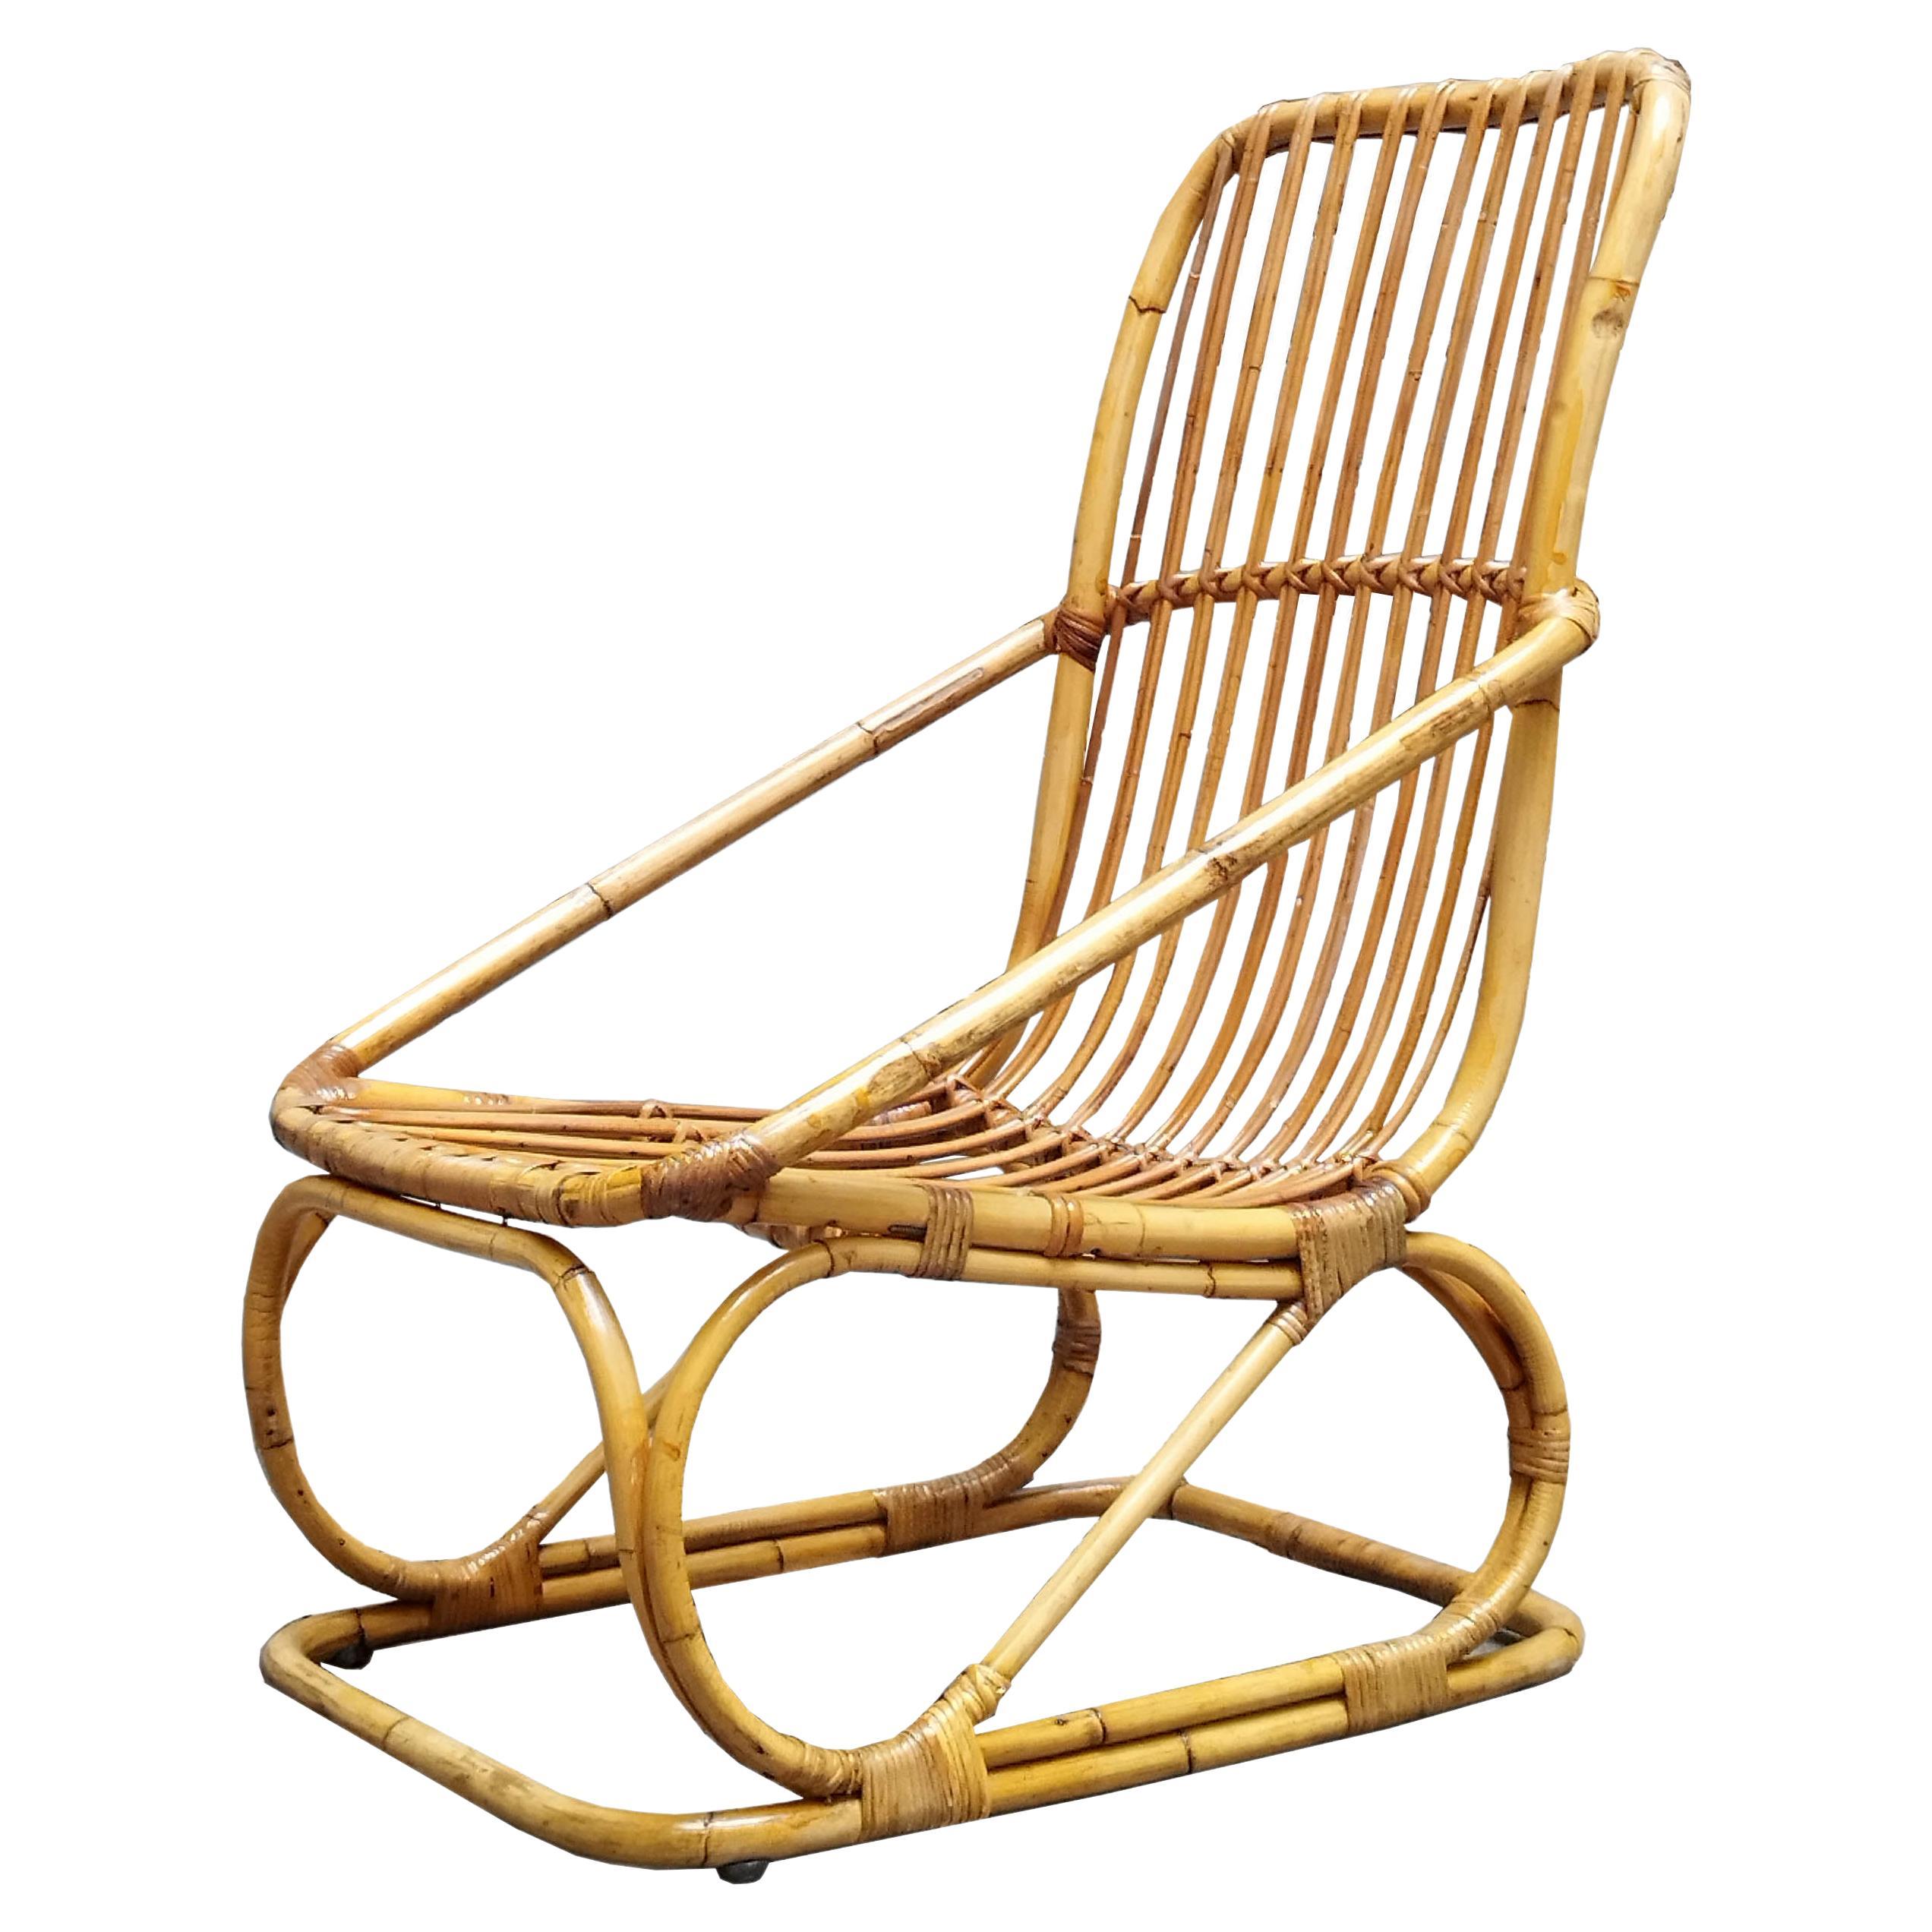 Tito Agnoli Attributed Rattan Armchair, Italy, 1960s For Sale